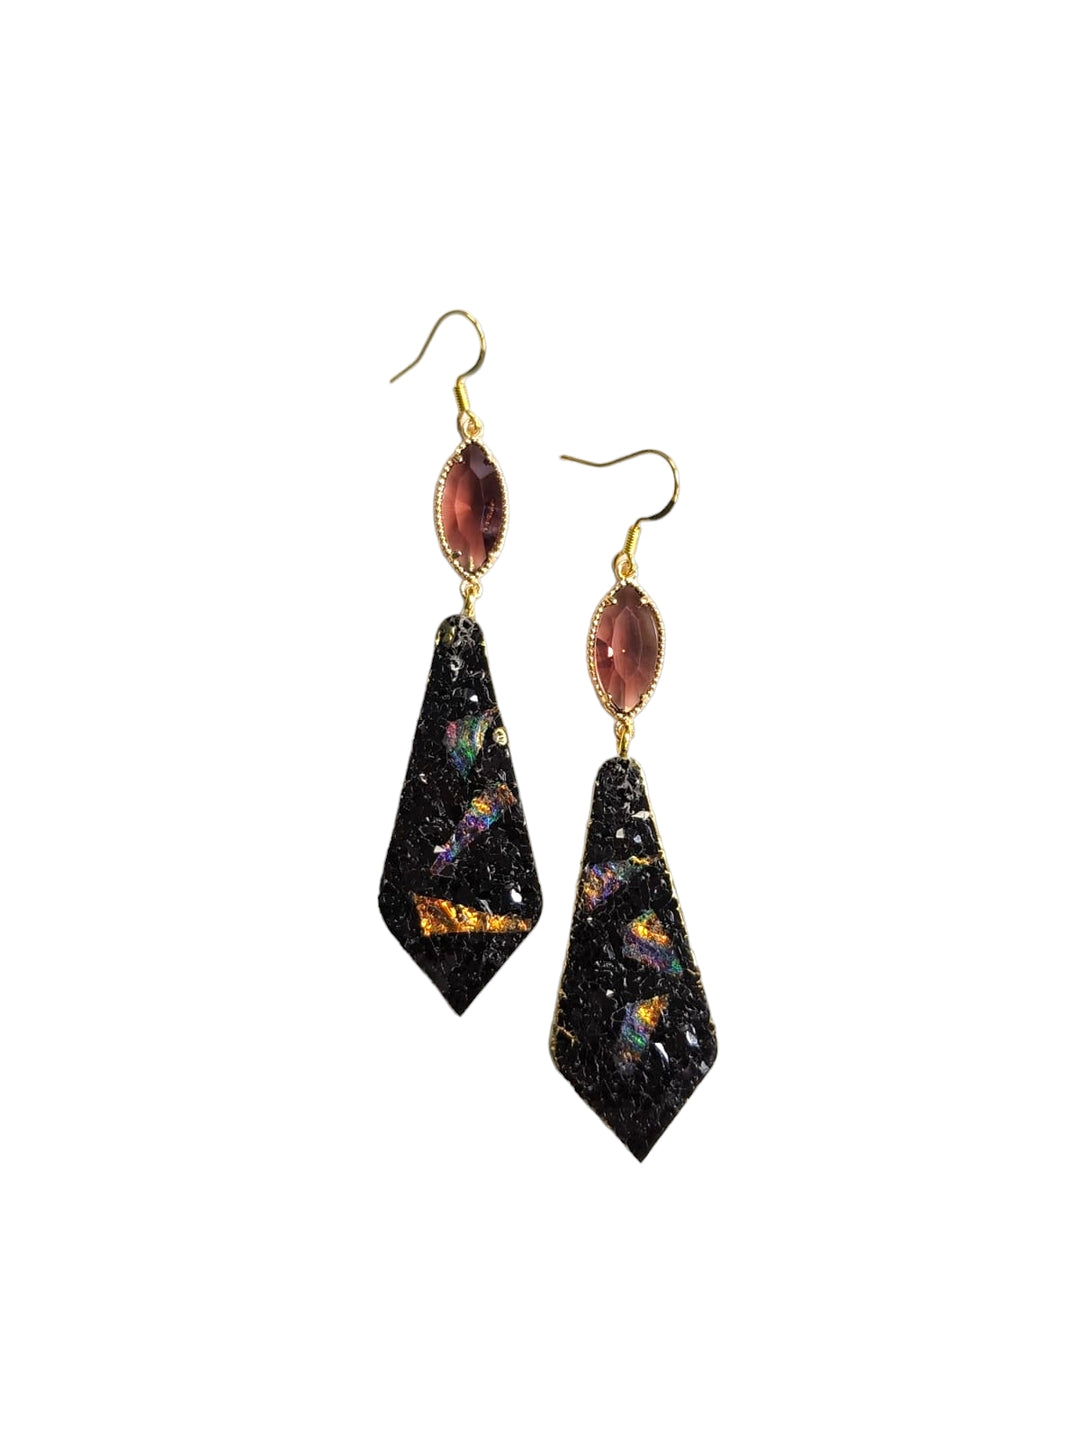 The Resin Gem Tie Earring Collection